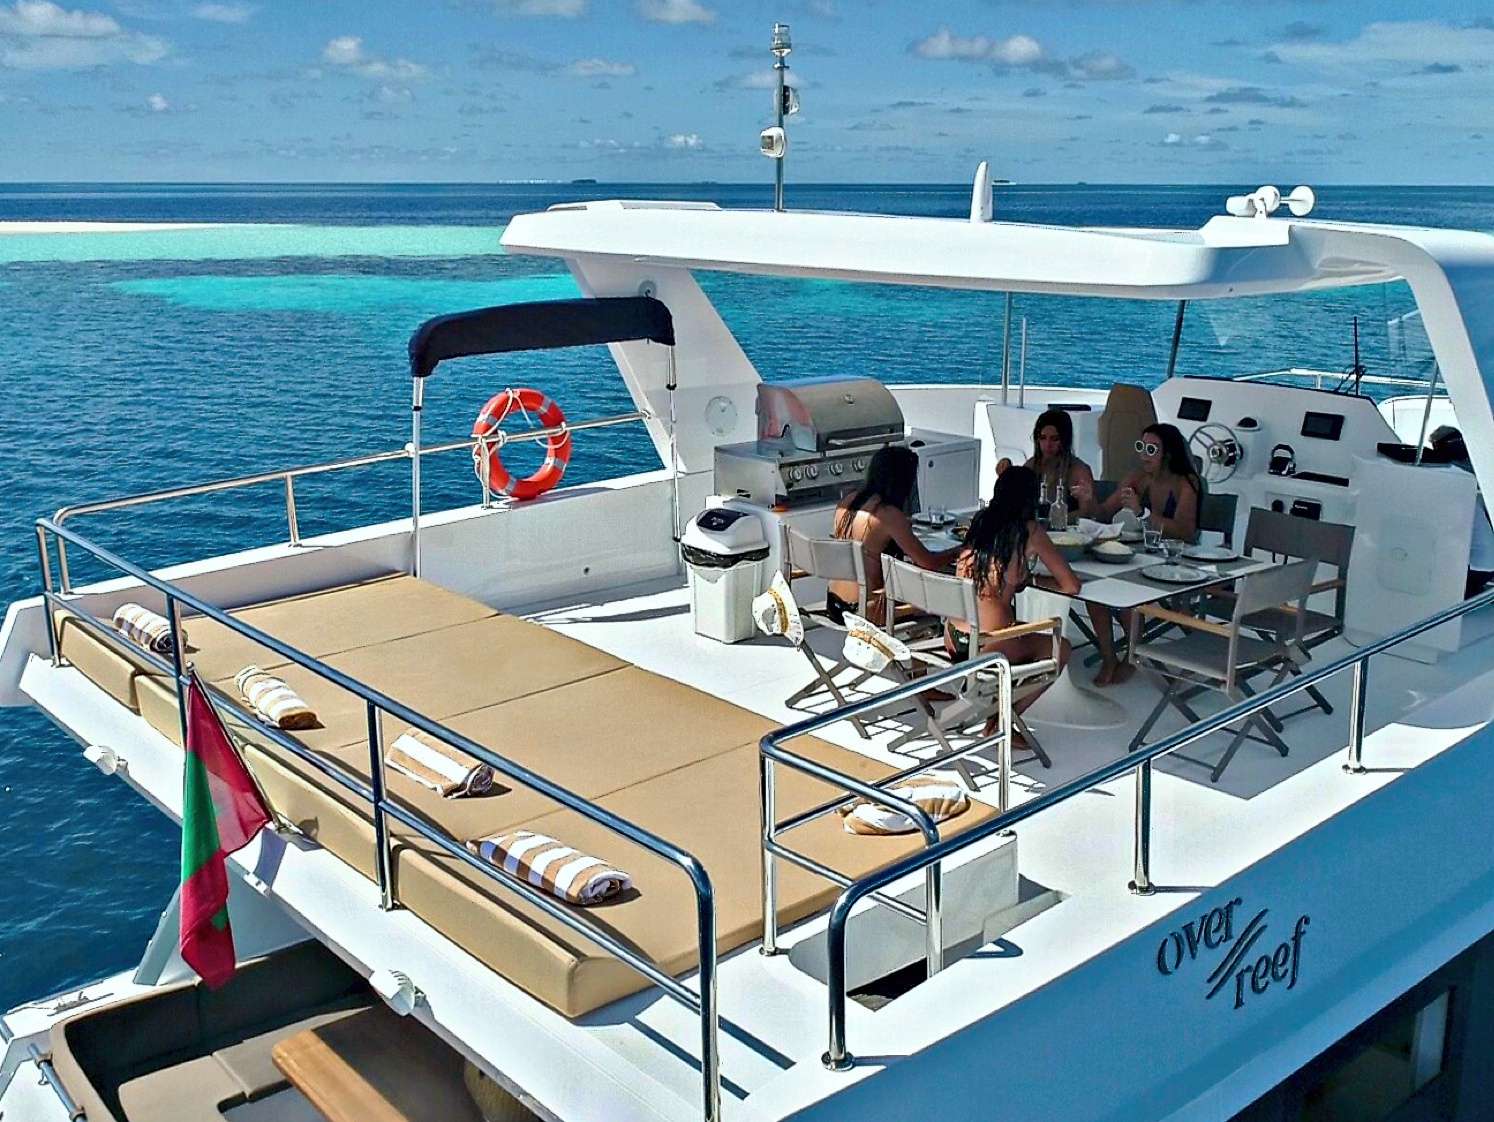 OVER REEF - Yacht Charter Maldives & Boat hire in Indian Ocean & SE Asia 5